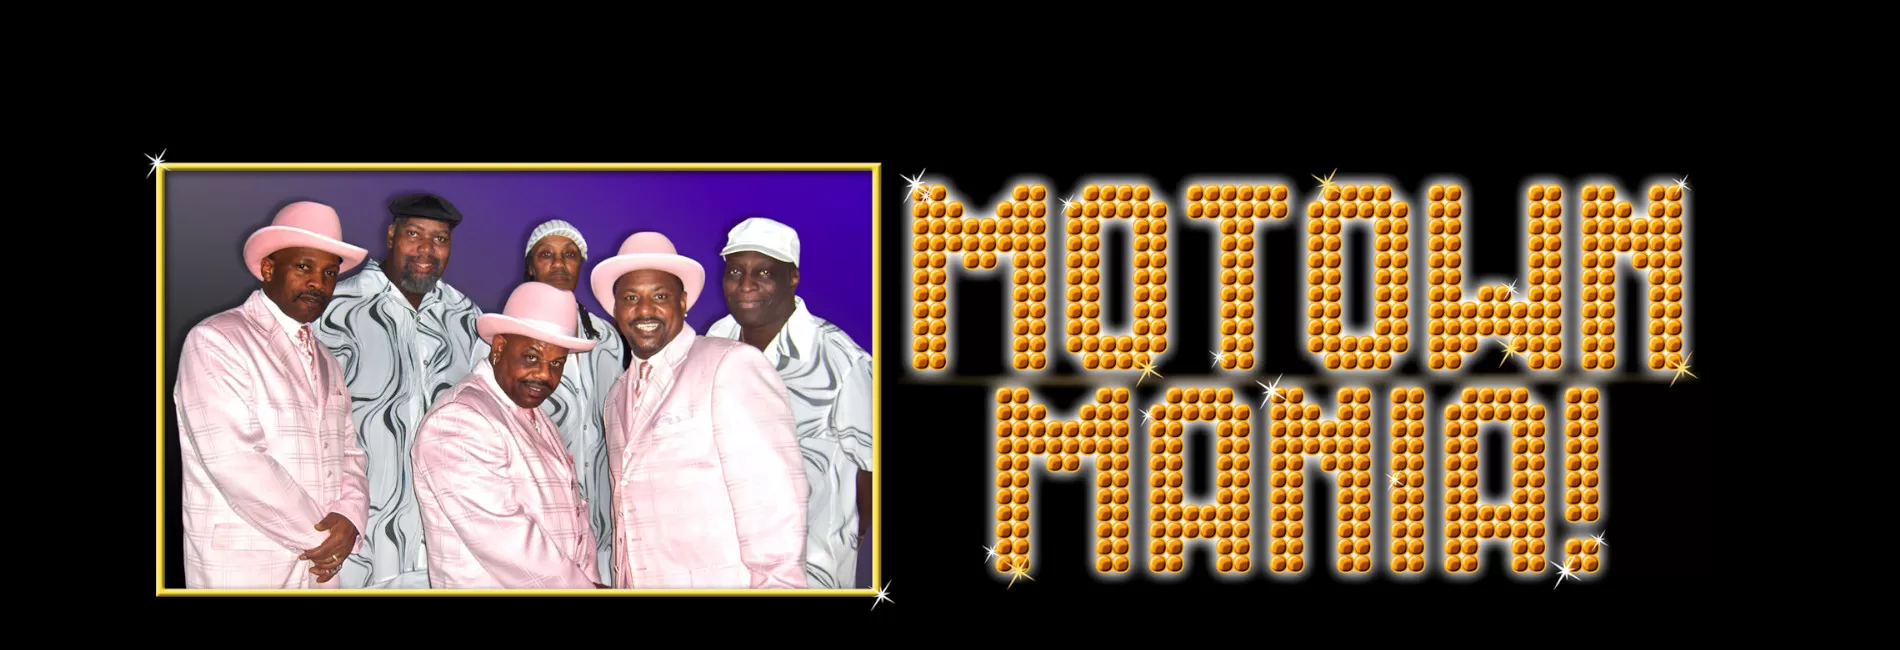 Motown Mania! The Golden Hits of the Temptations & the Superstars of Motown!